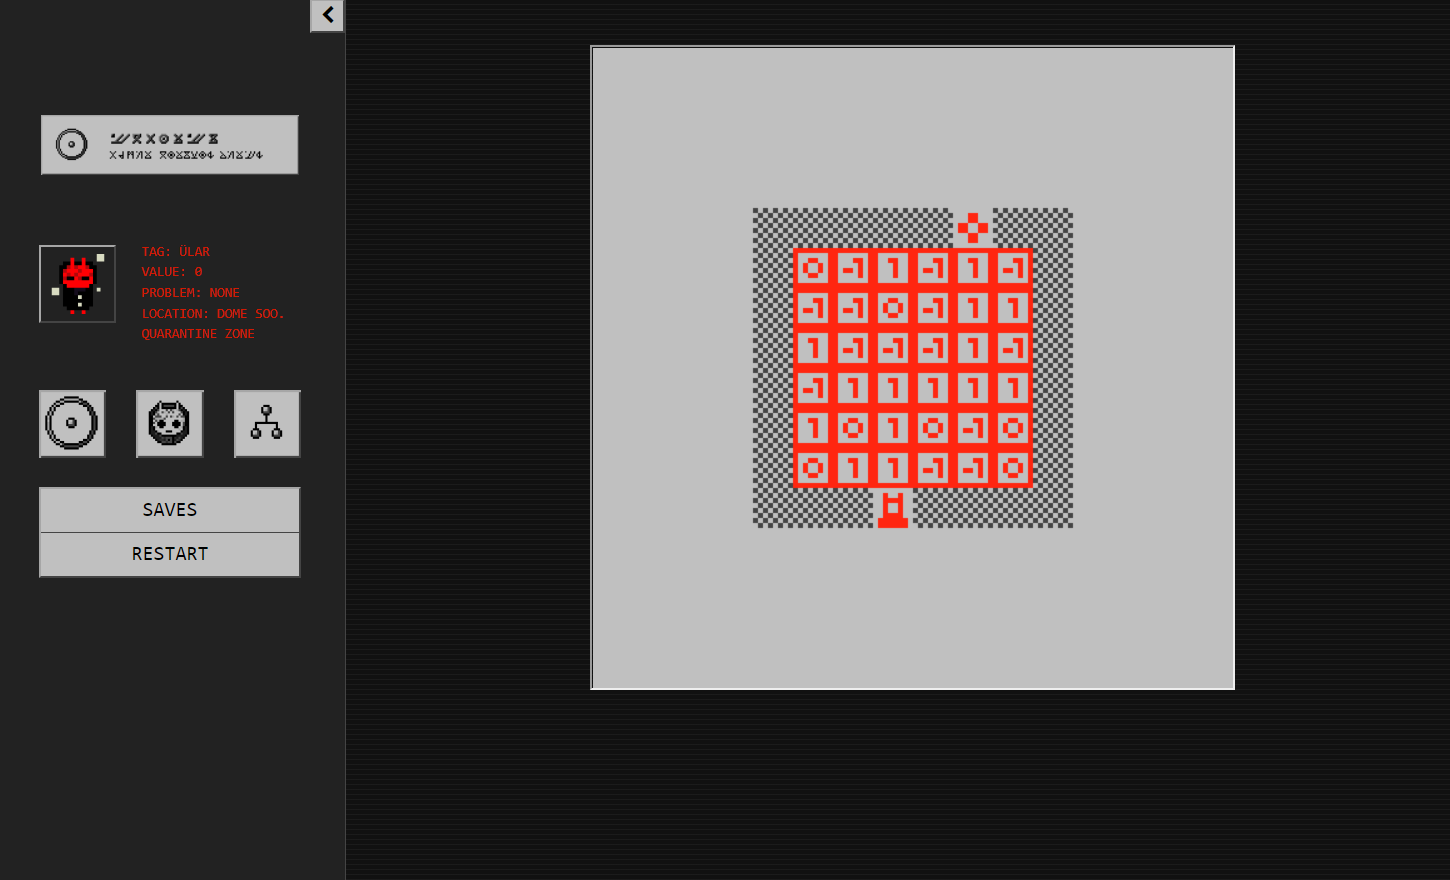 A screenshot from Mr. Rainer's Solve It Service featuring one of the bitsy-designed puzzles where you traverse binary code to restore the protagonist's value.